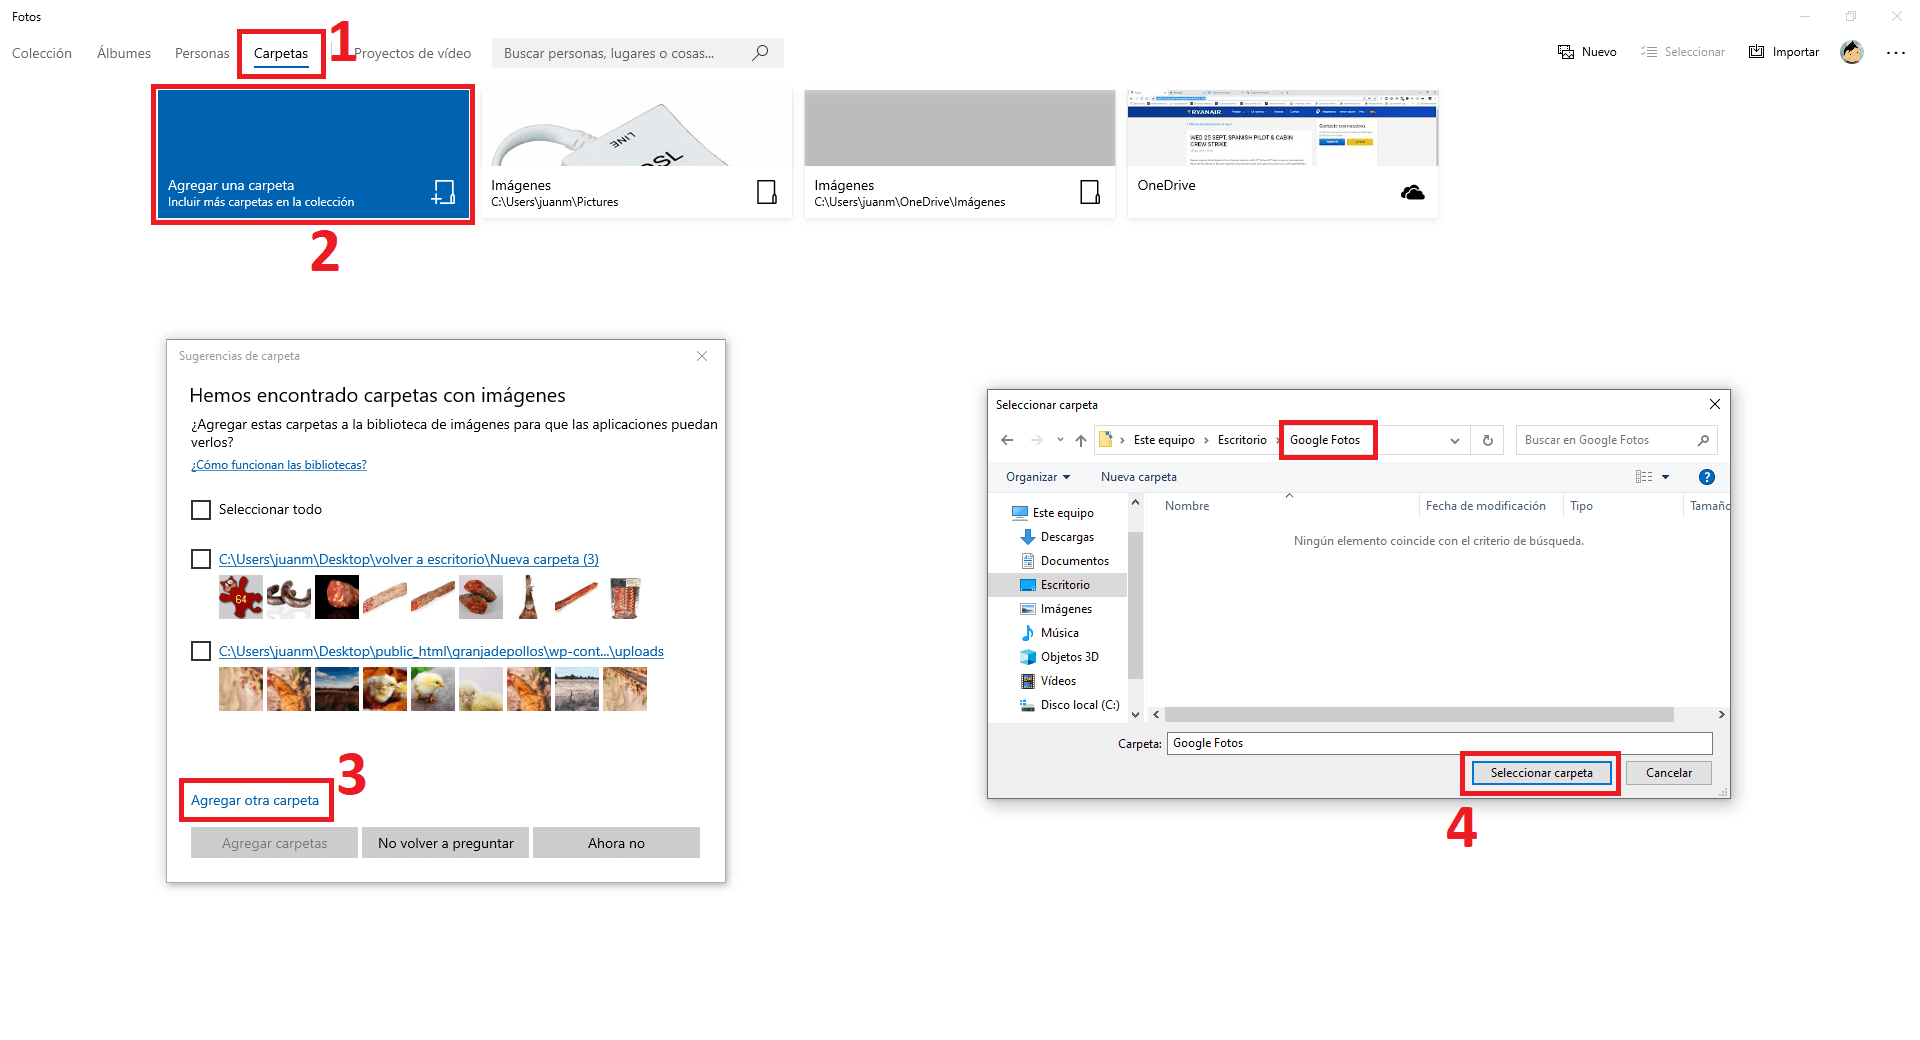 With the Windows 10 Photos app you can see the photos from Google Photos